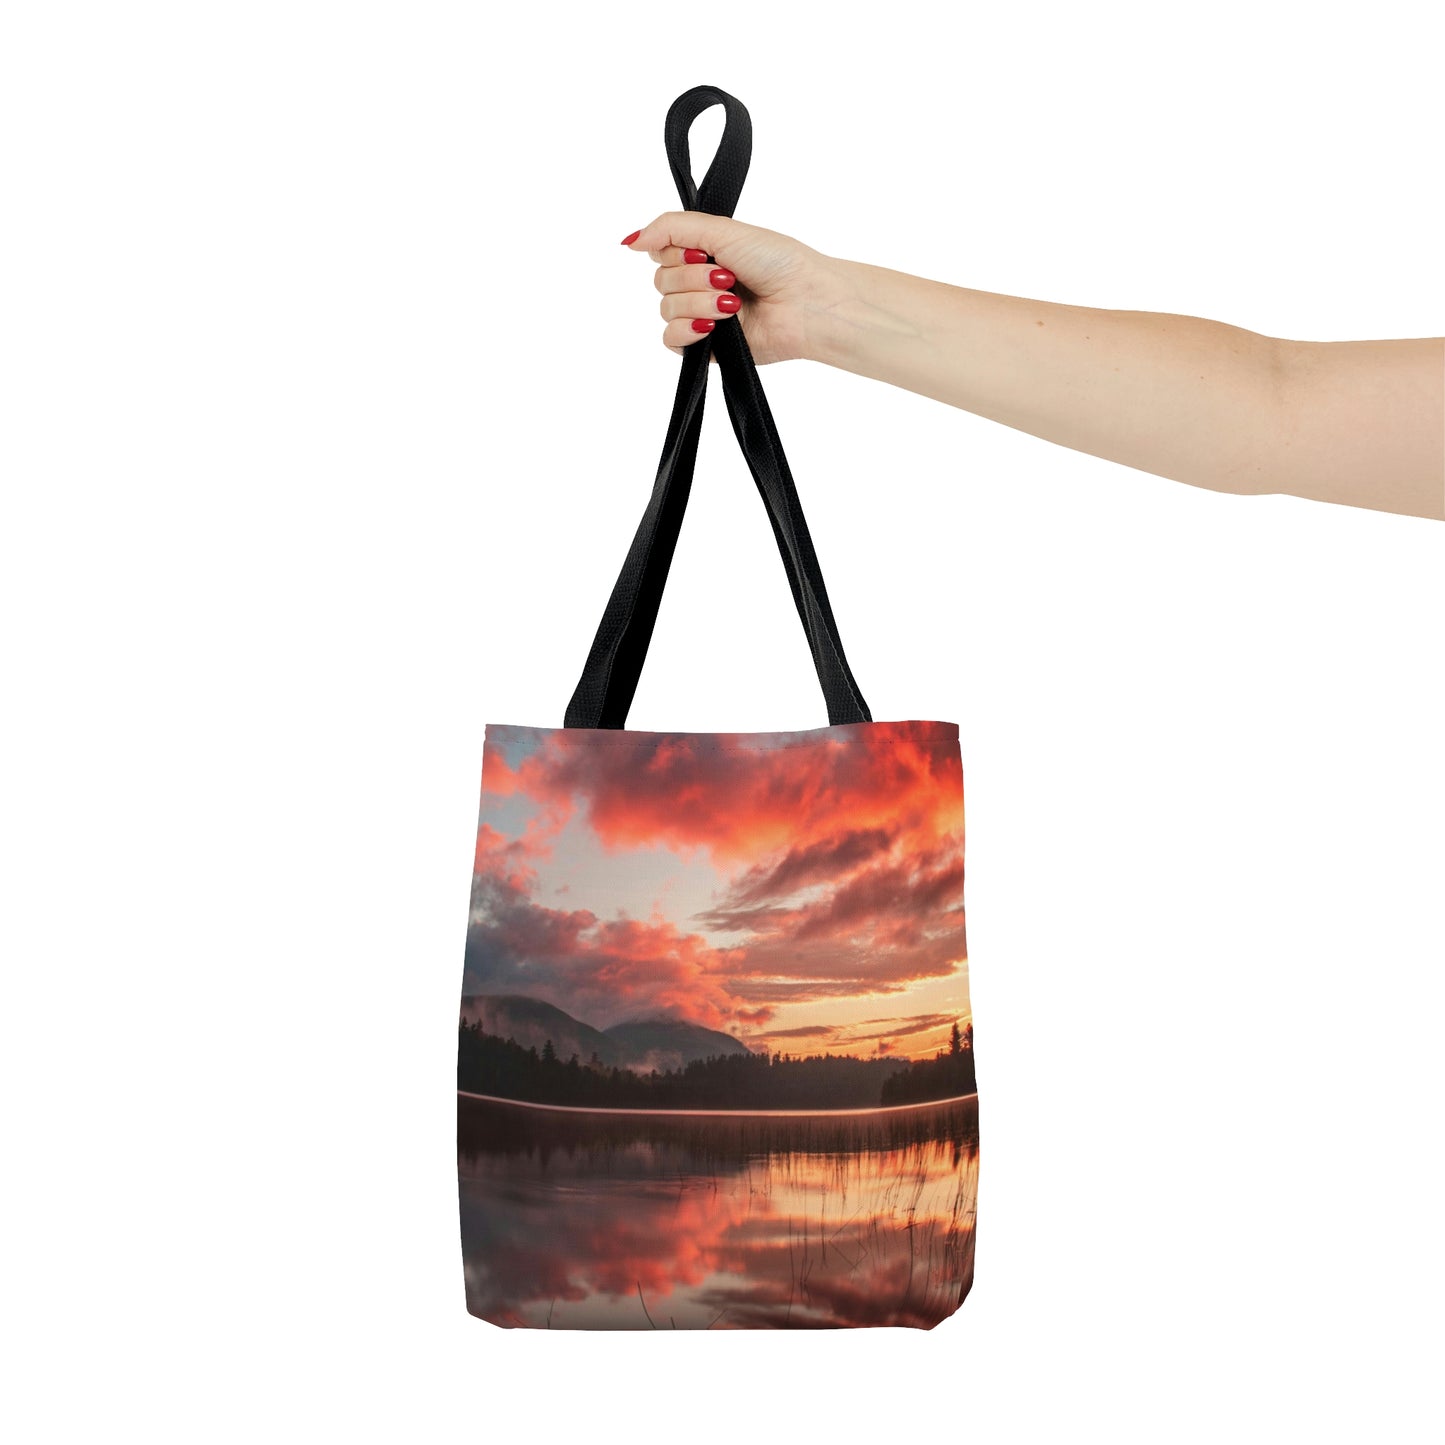 Tote Bag - Connery Pond Sunrise